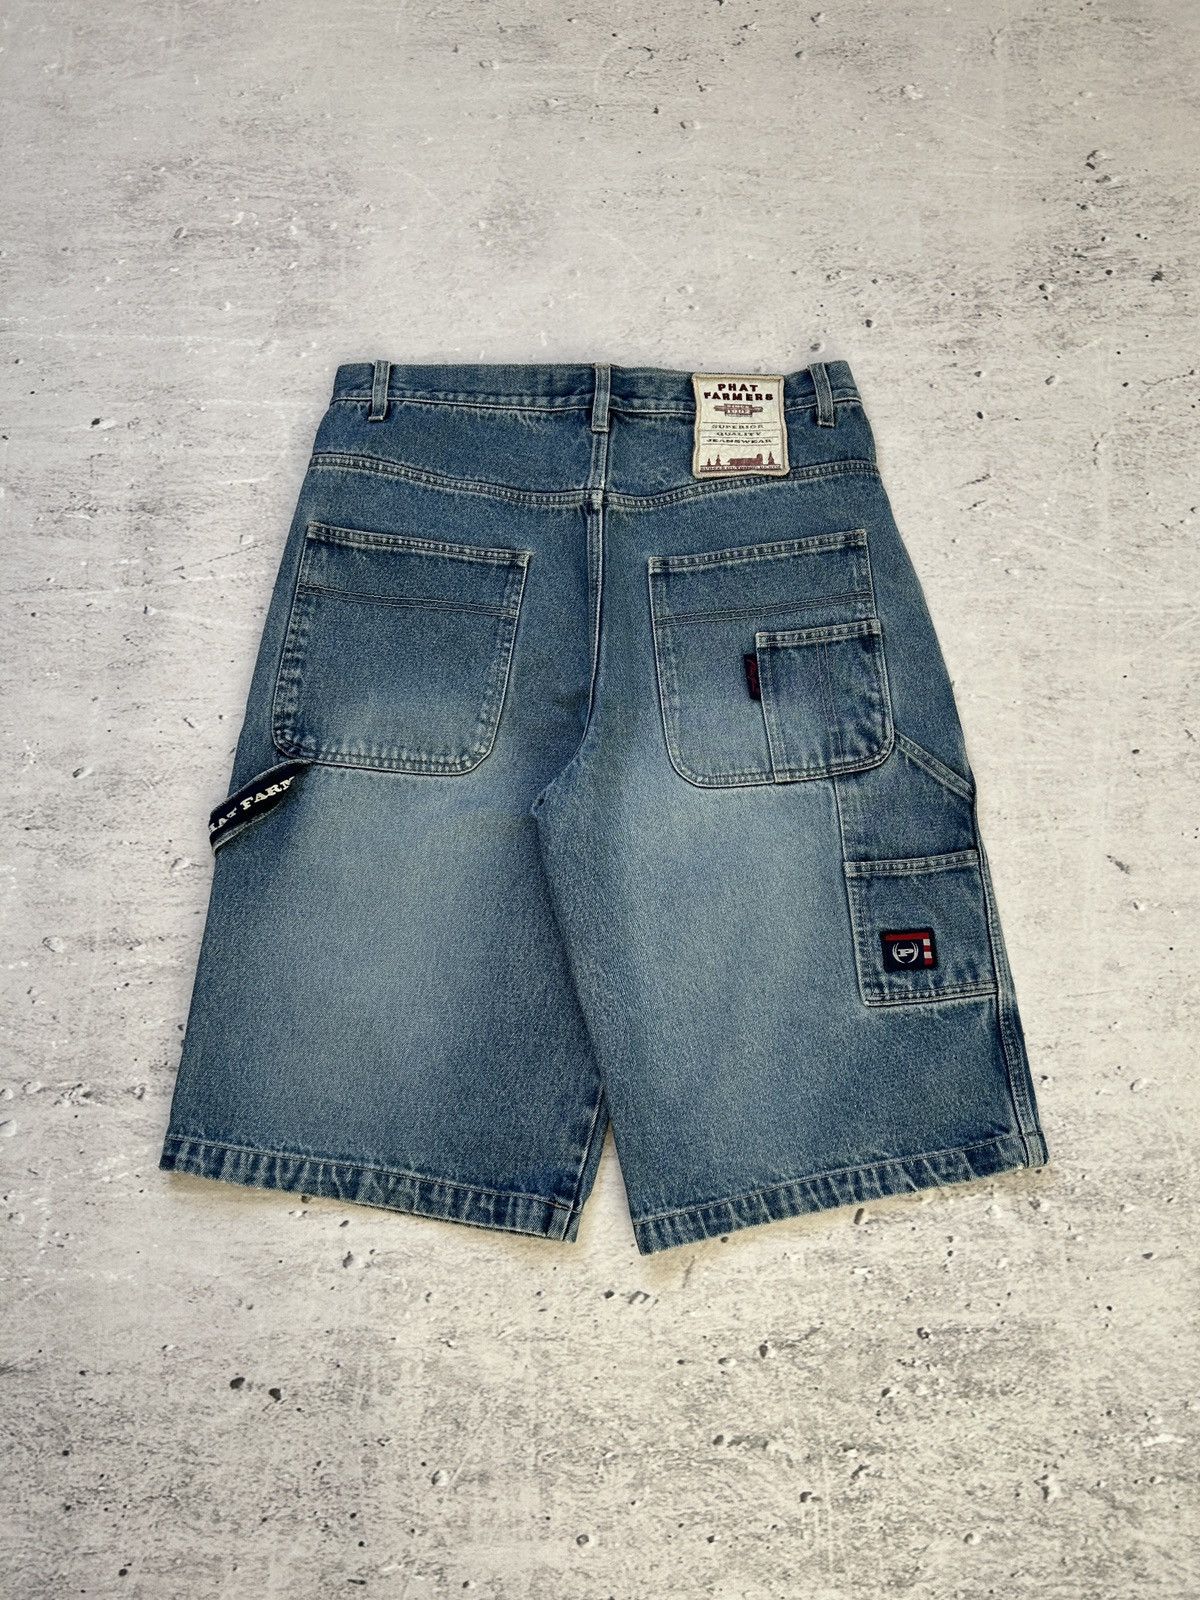 Pre-owned Jnco X Southpole Vintage Baggy Phat Farm Carpenter Denim Jorts 00s In Blue